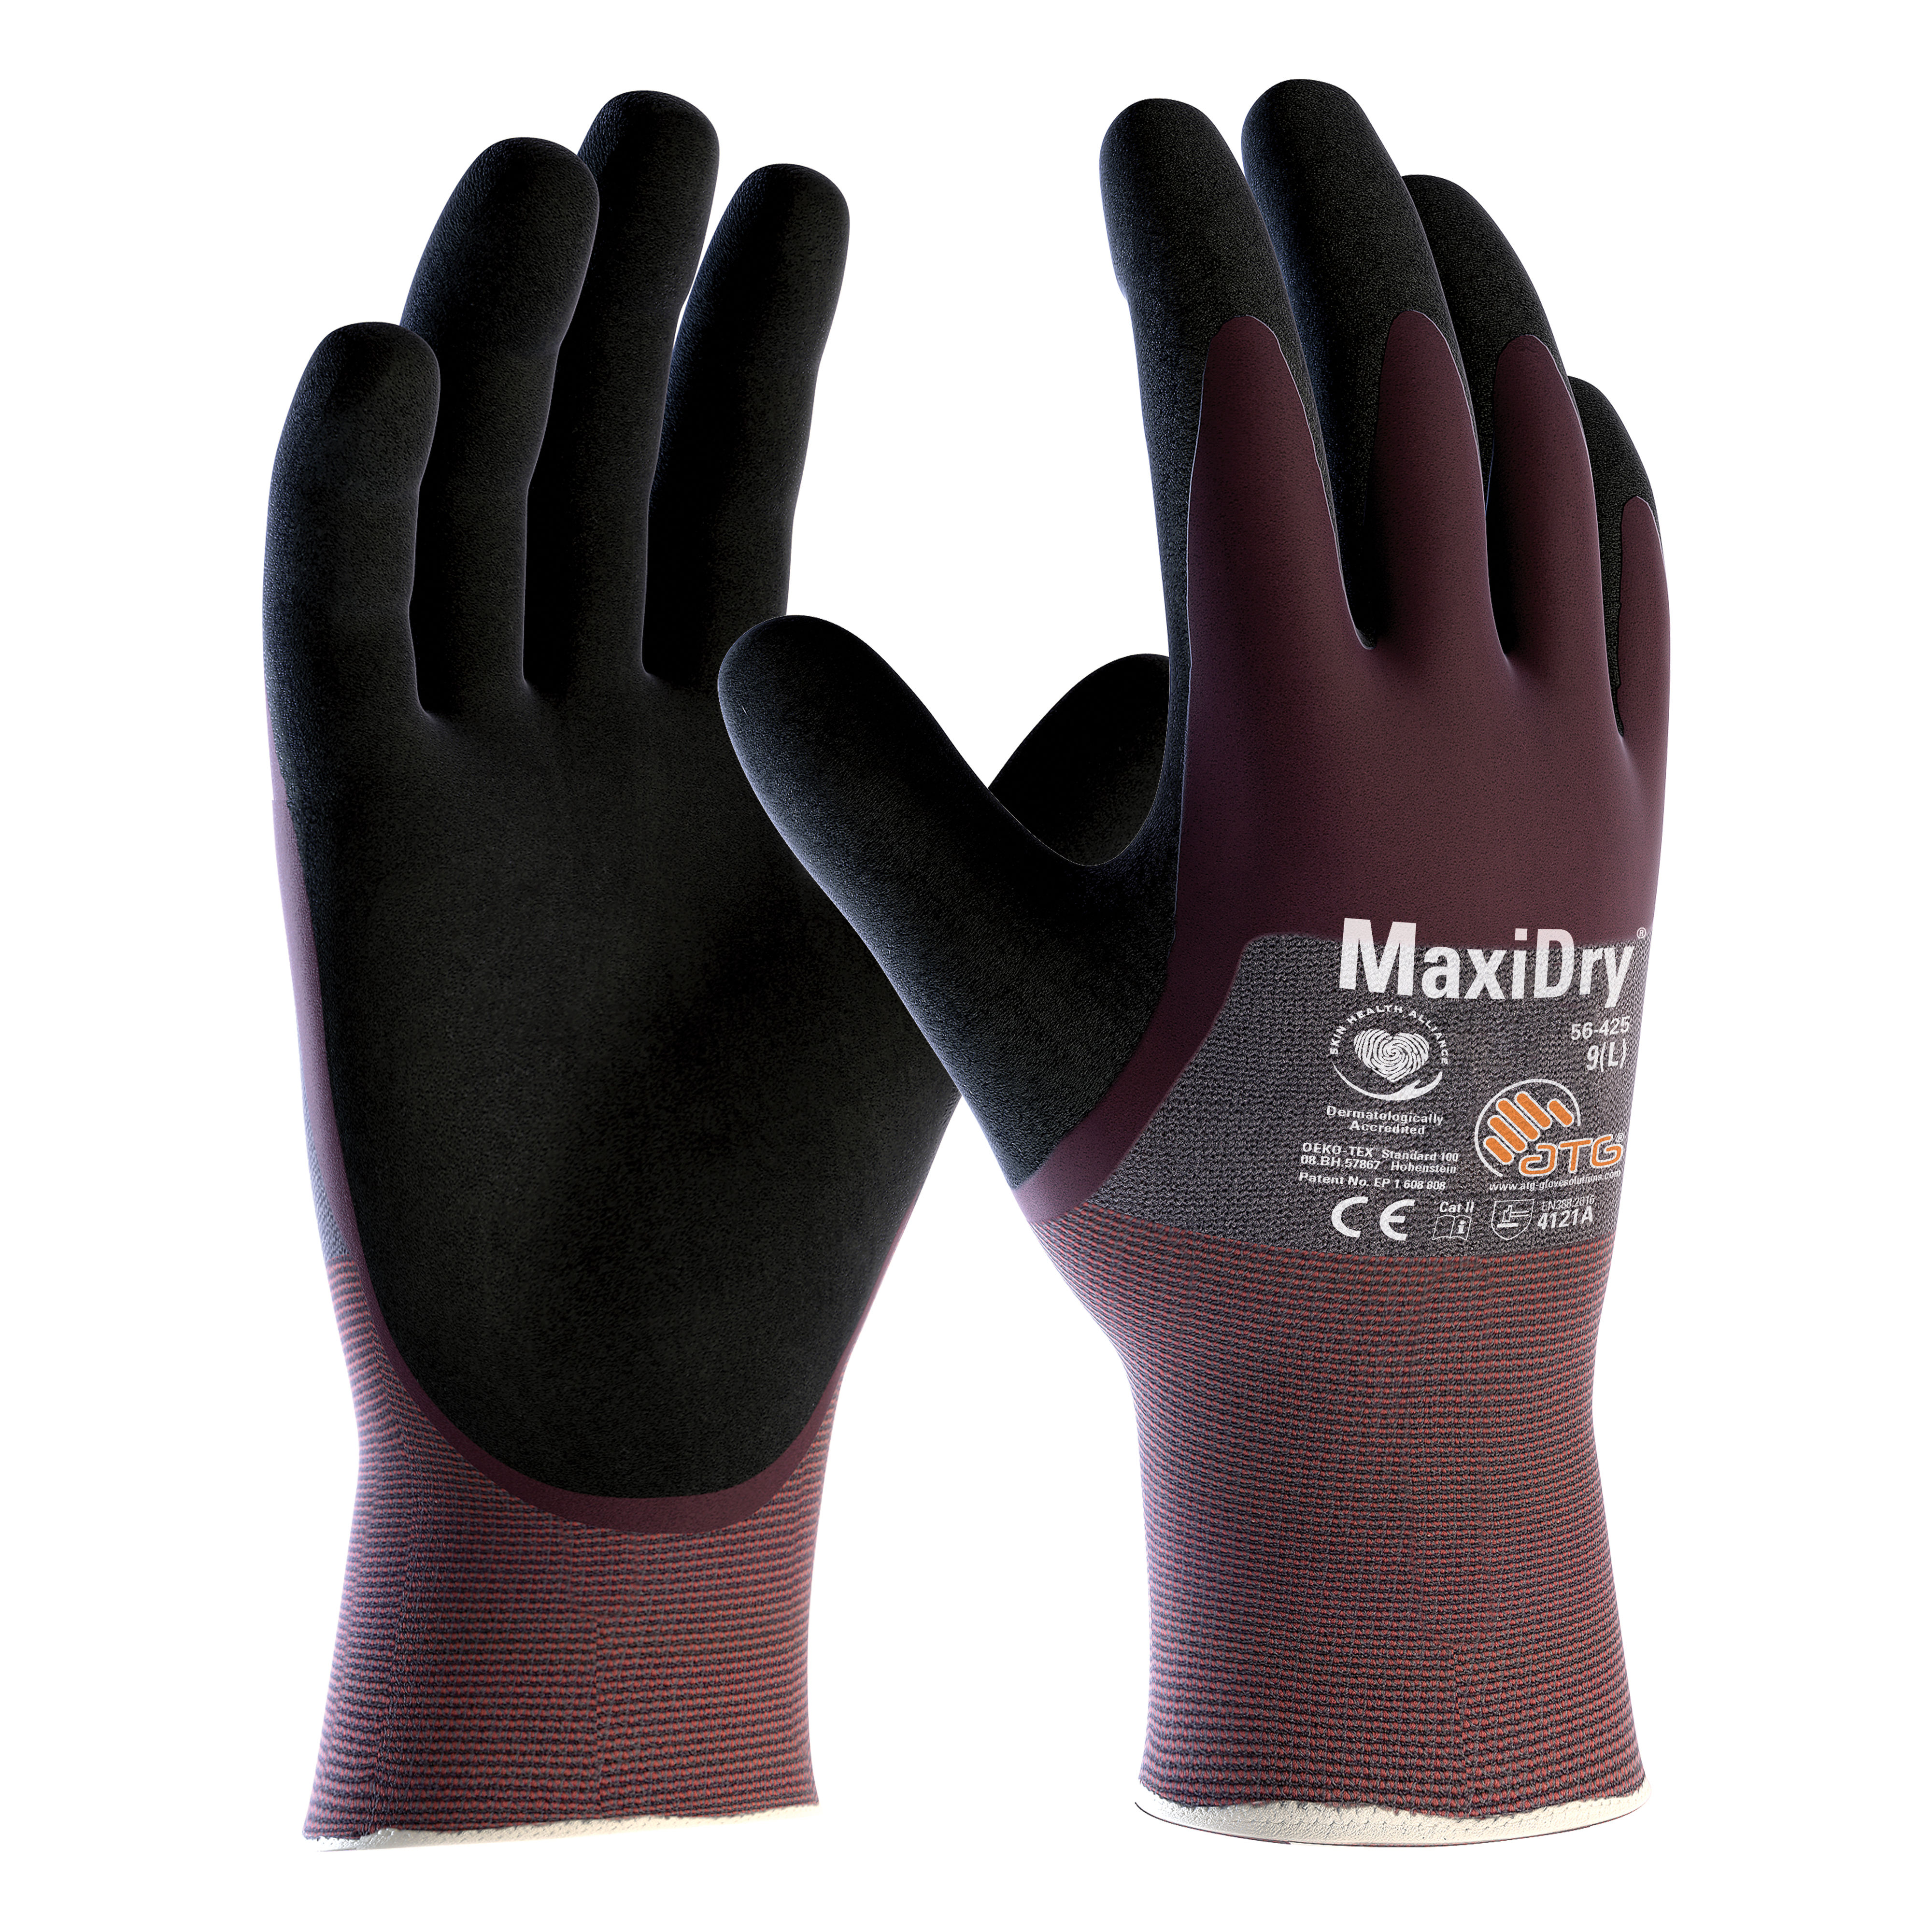 ATG MaxiDry 3/4 Coated Oil Repellent Gloves